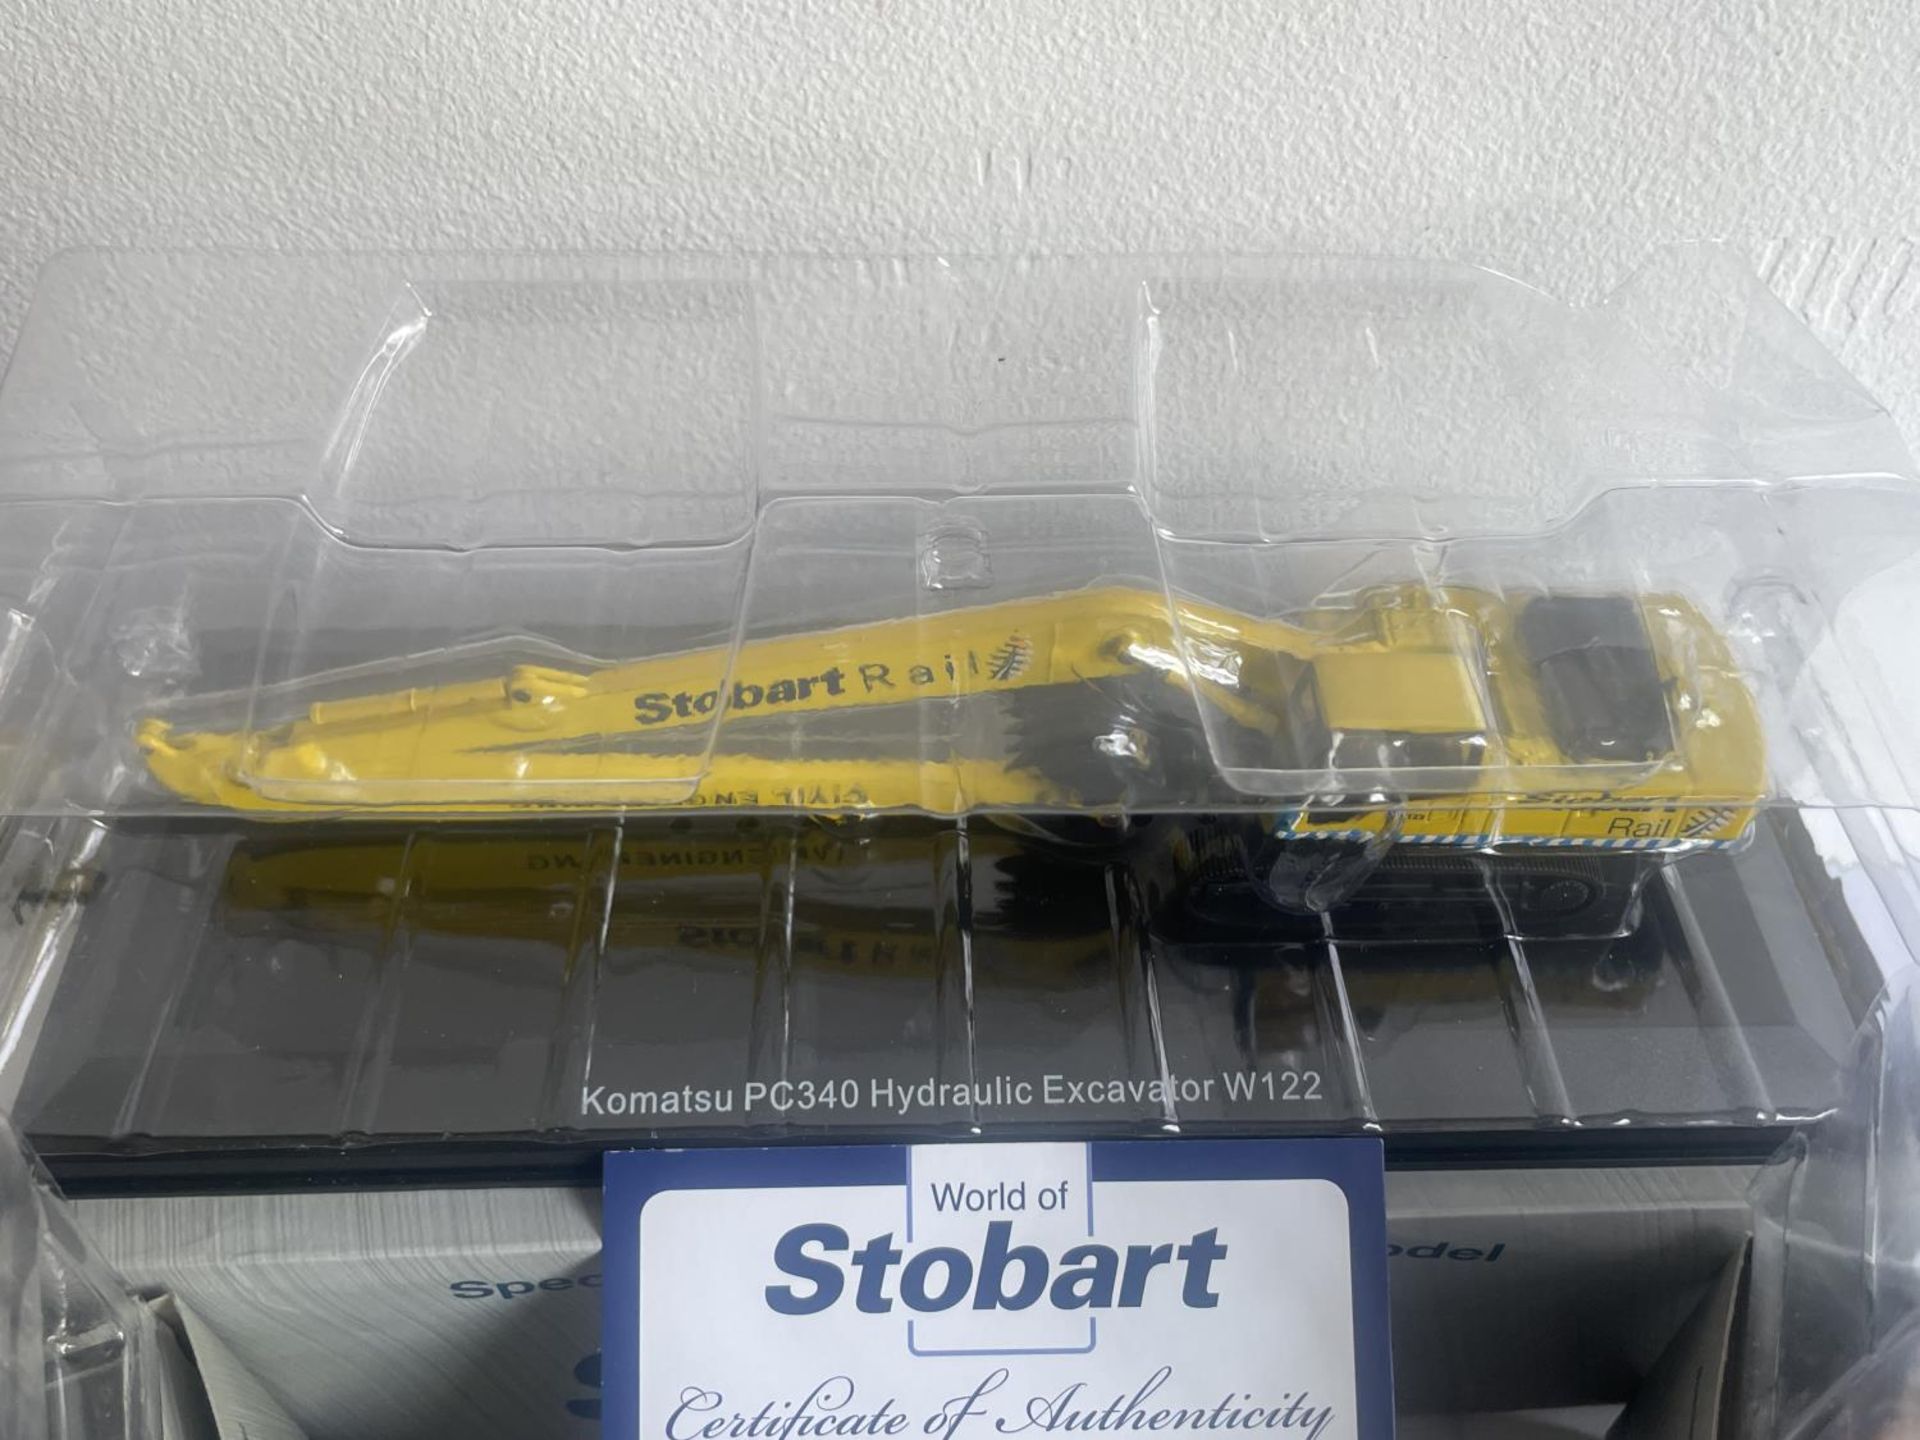 FOUR BOXED STOBART MODELS OF EXCAVATORS SOME WITH COA - Image 2 of 6